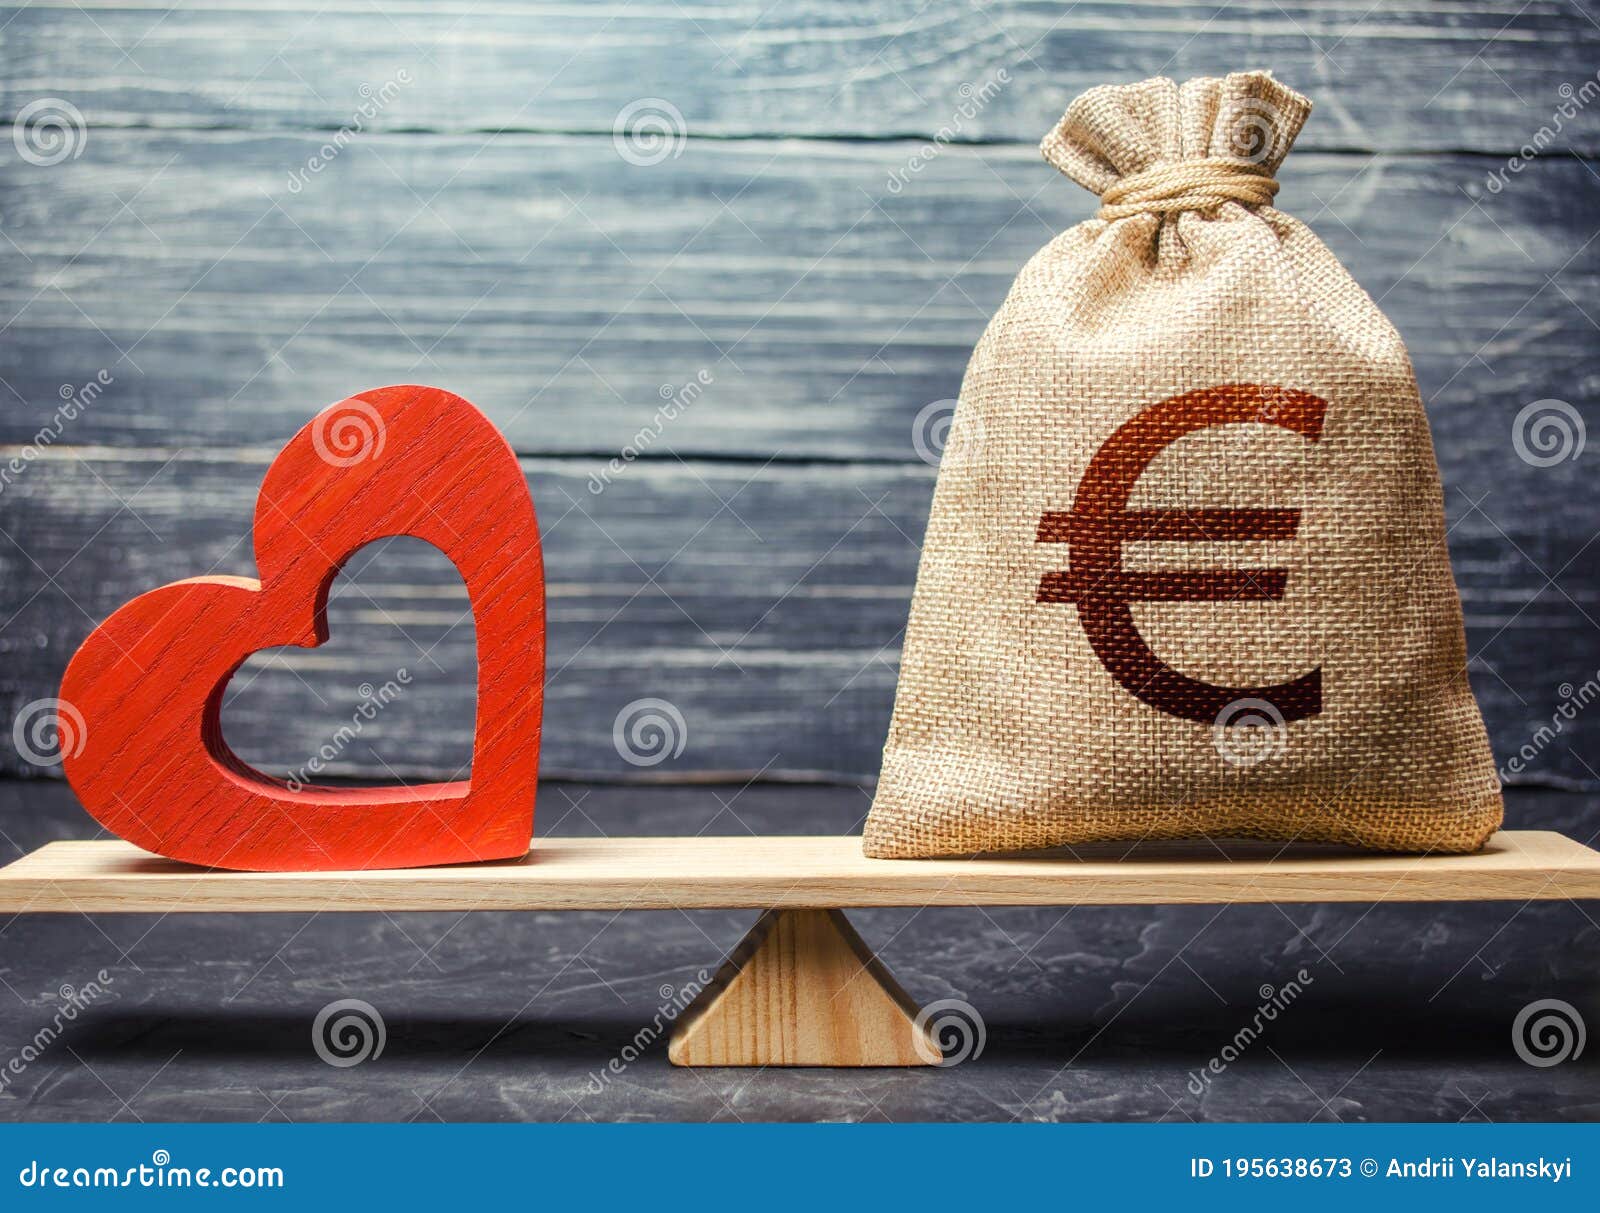 euro money bag and red heart on scales. health life insurance financing concept. subsidies. funding healthcare system. reforming